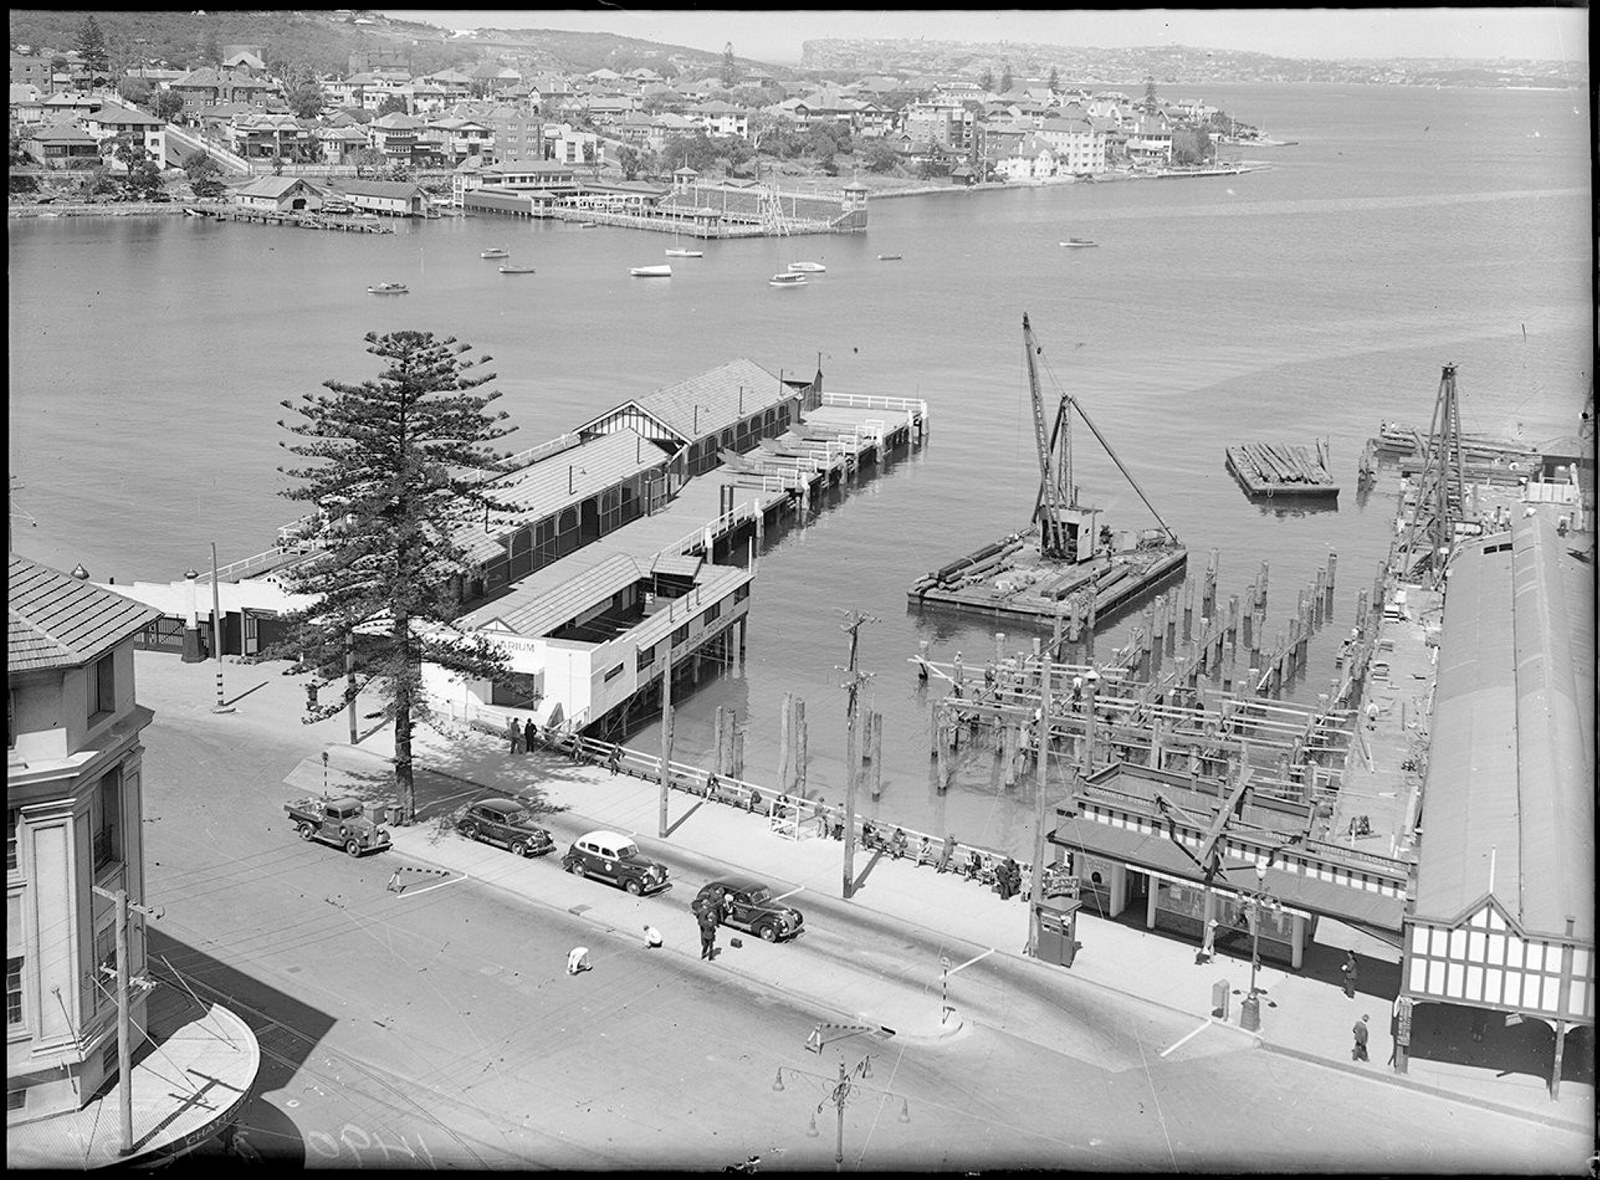 Maritime Services Board, Manly